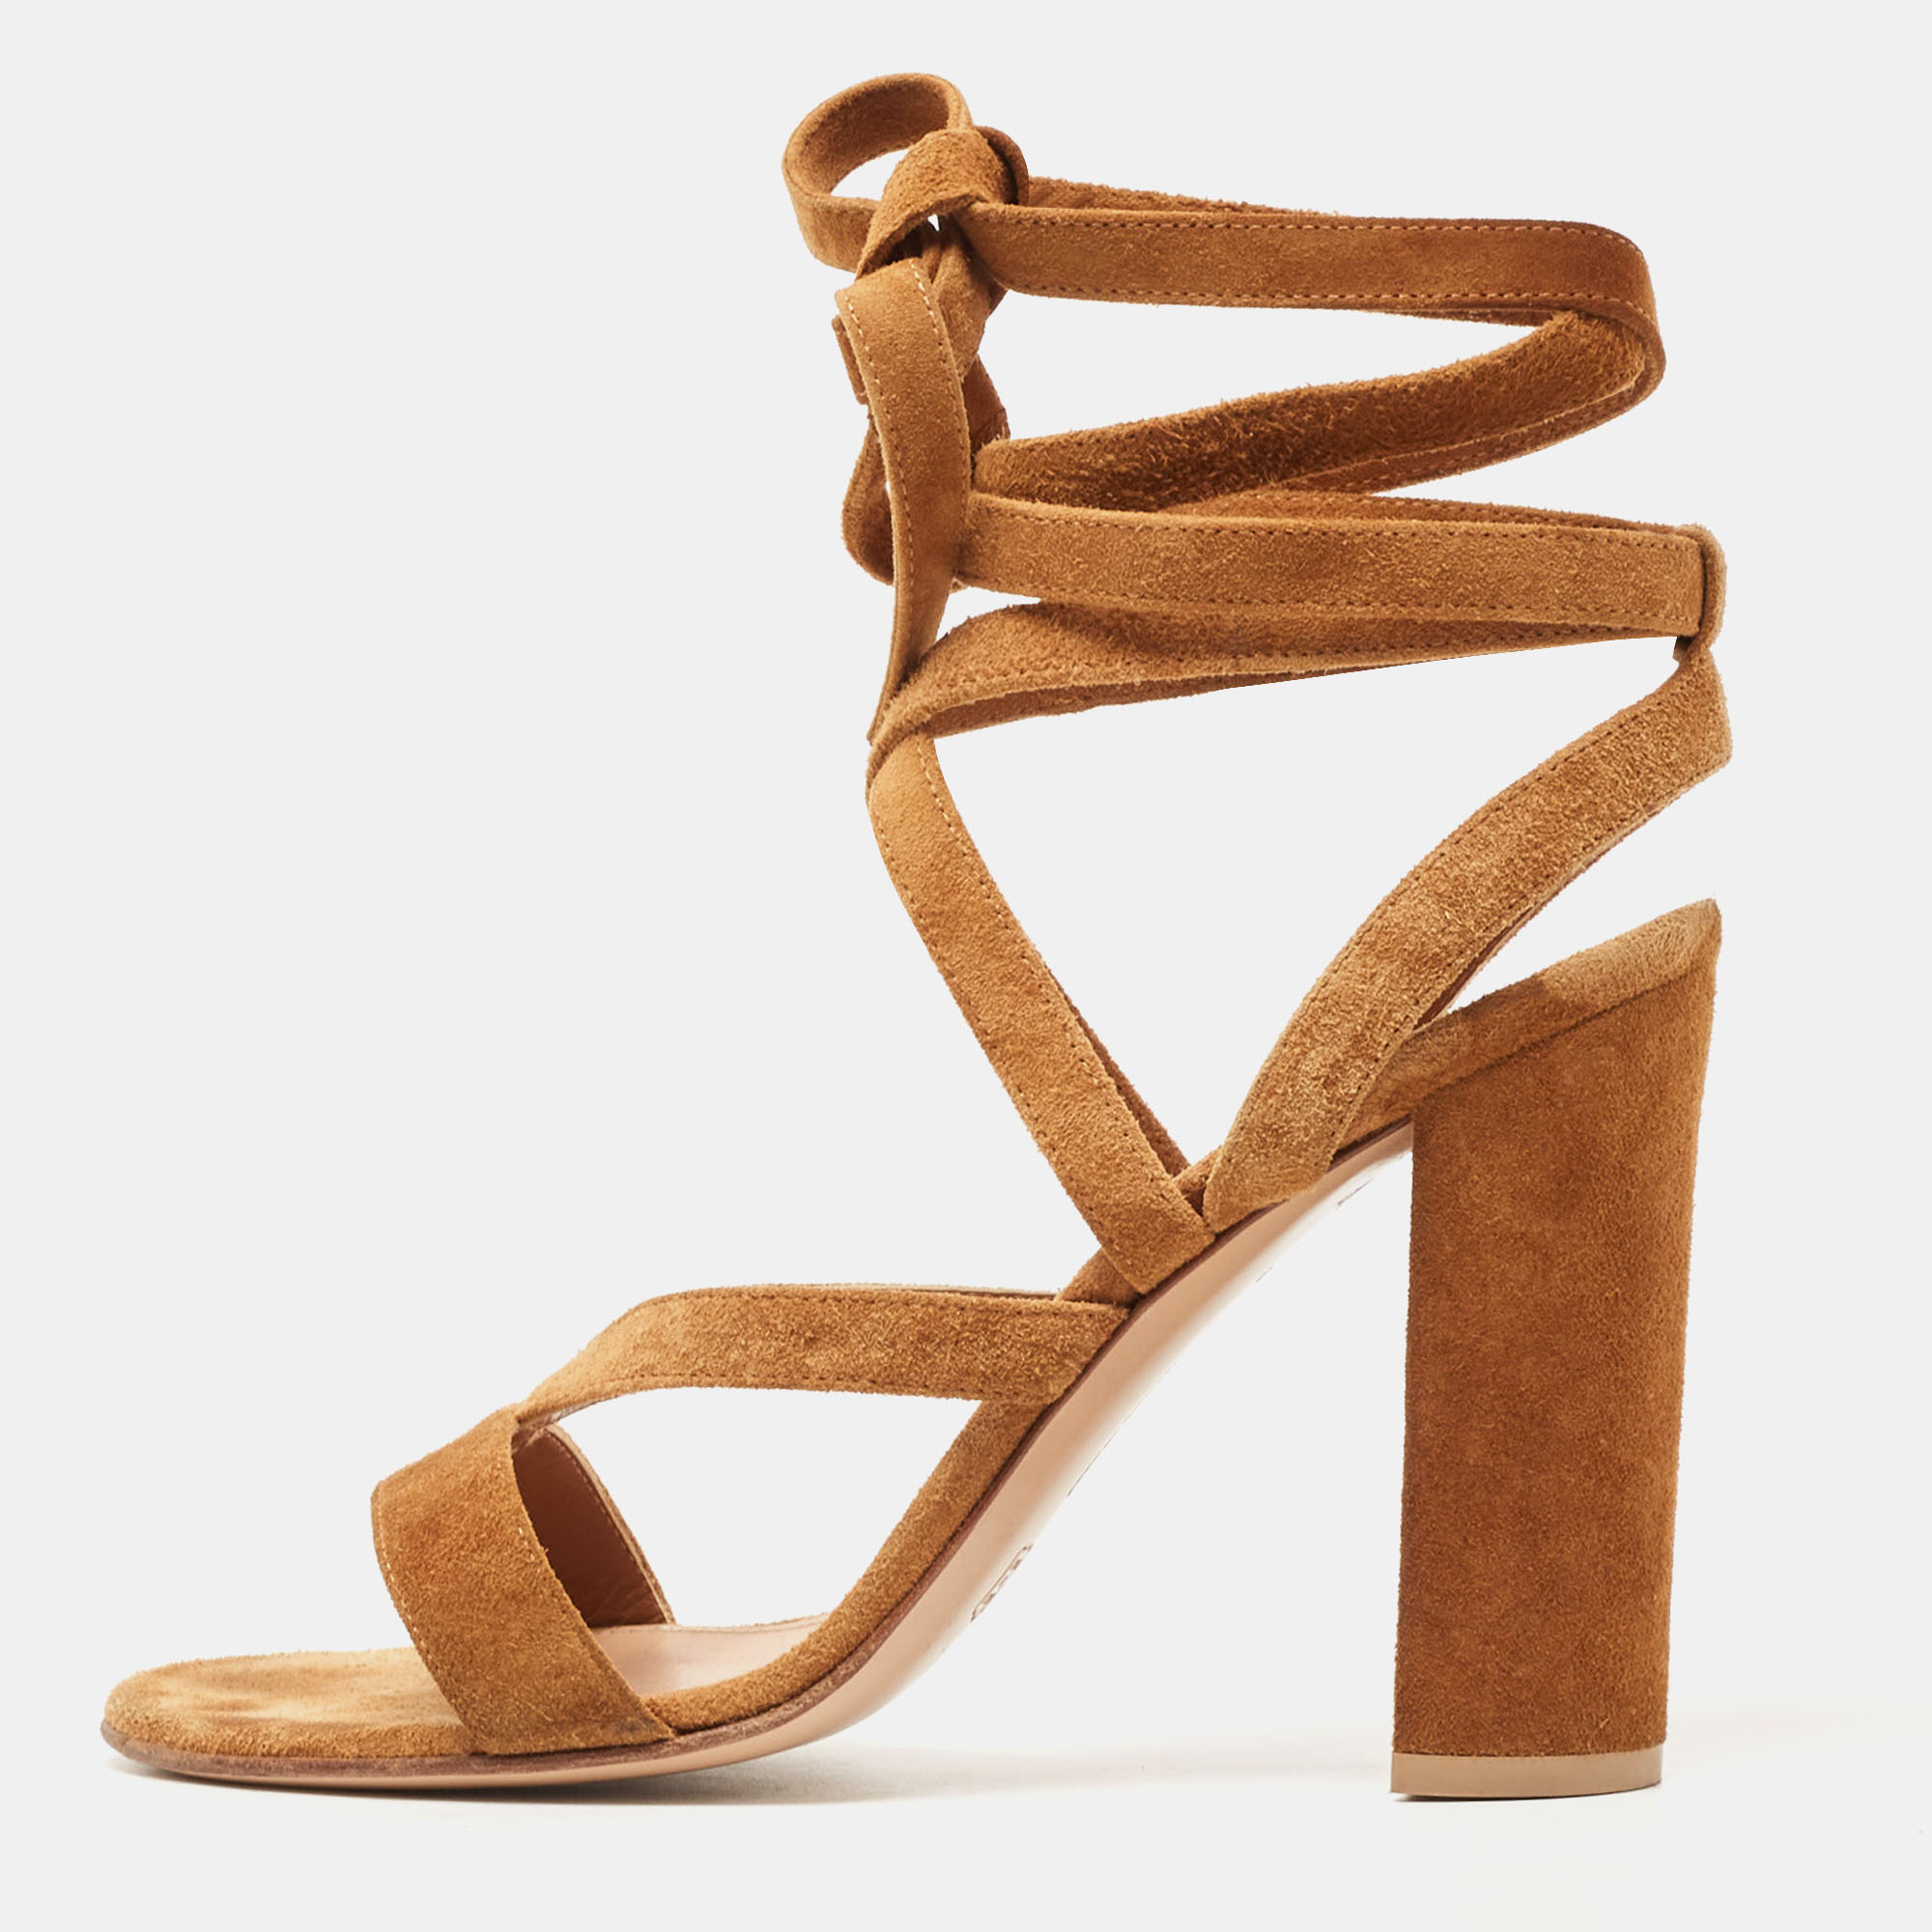 Gianvito Rossi Brown Suede Ankle Wrap Sandals Size 38